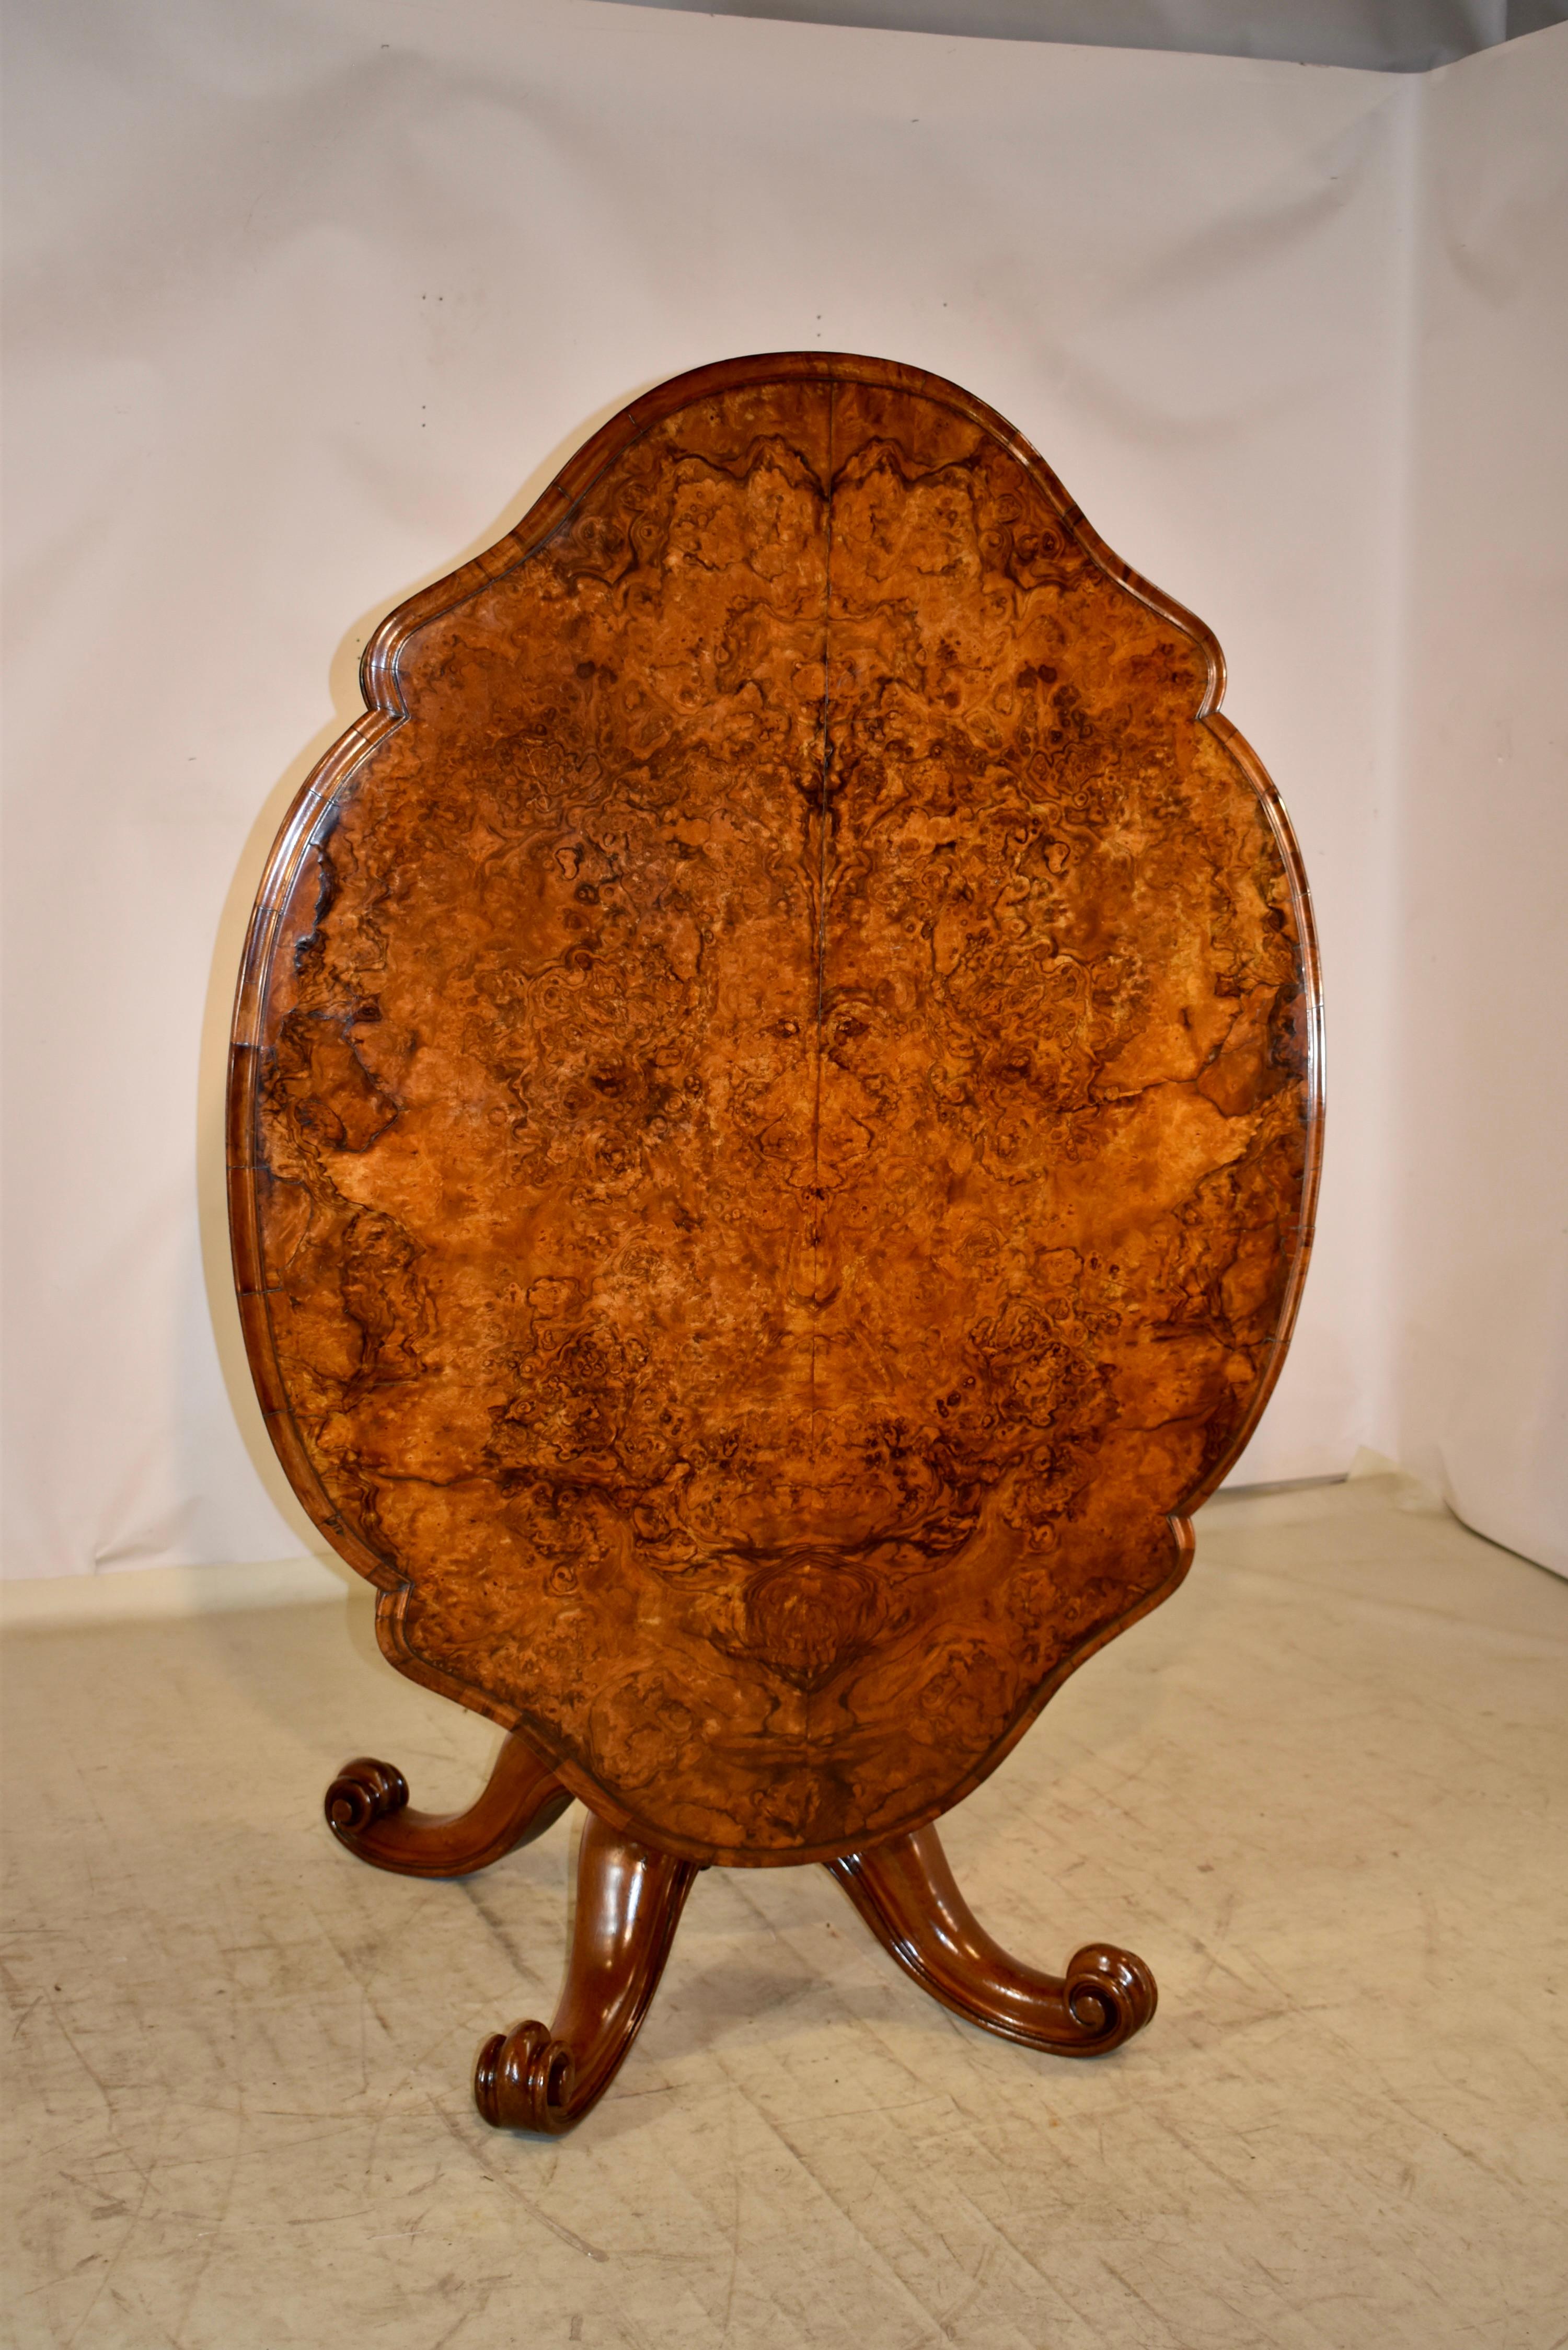 19th century mahogany tilt-top table with a gorgeously grained burl walnut top, which is shaped and beveled around the edge.  The top follows down to a simple apron, which is also made from burl walnut, and has the same rich pattern from the top. 